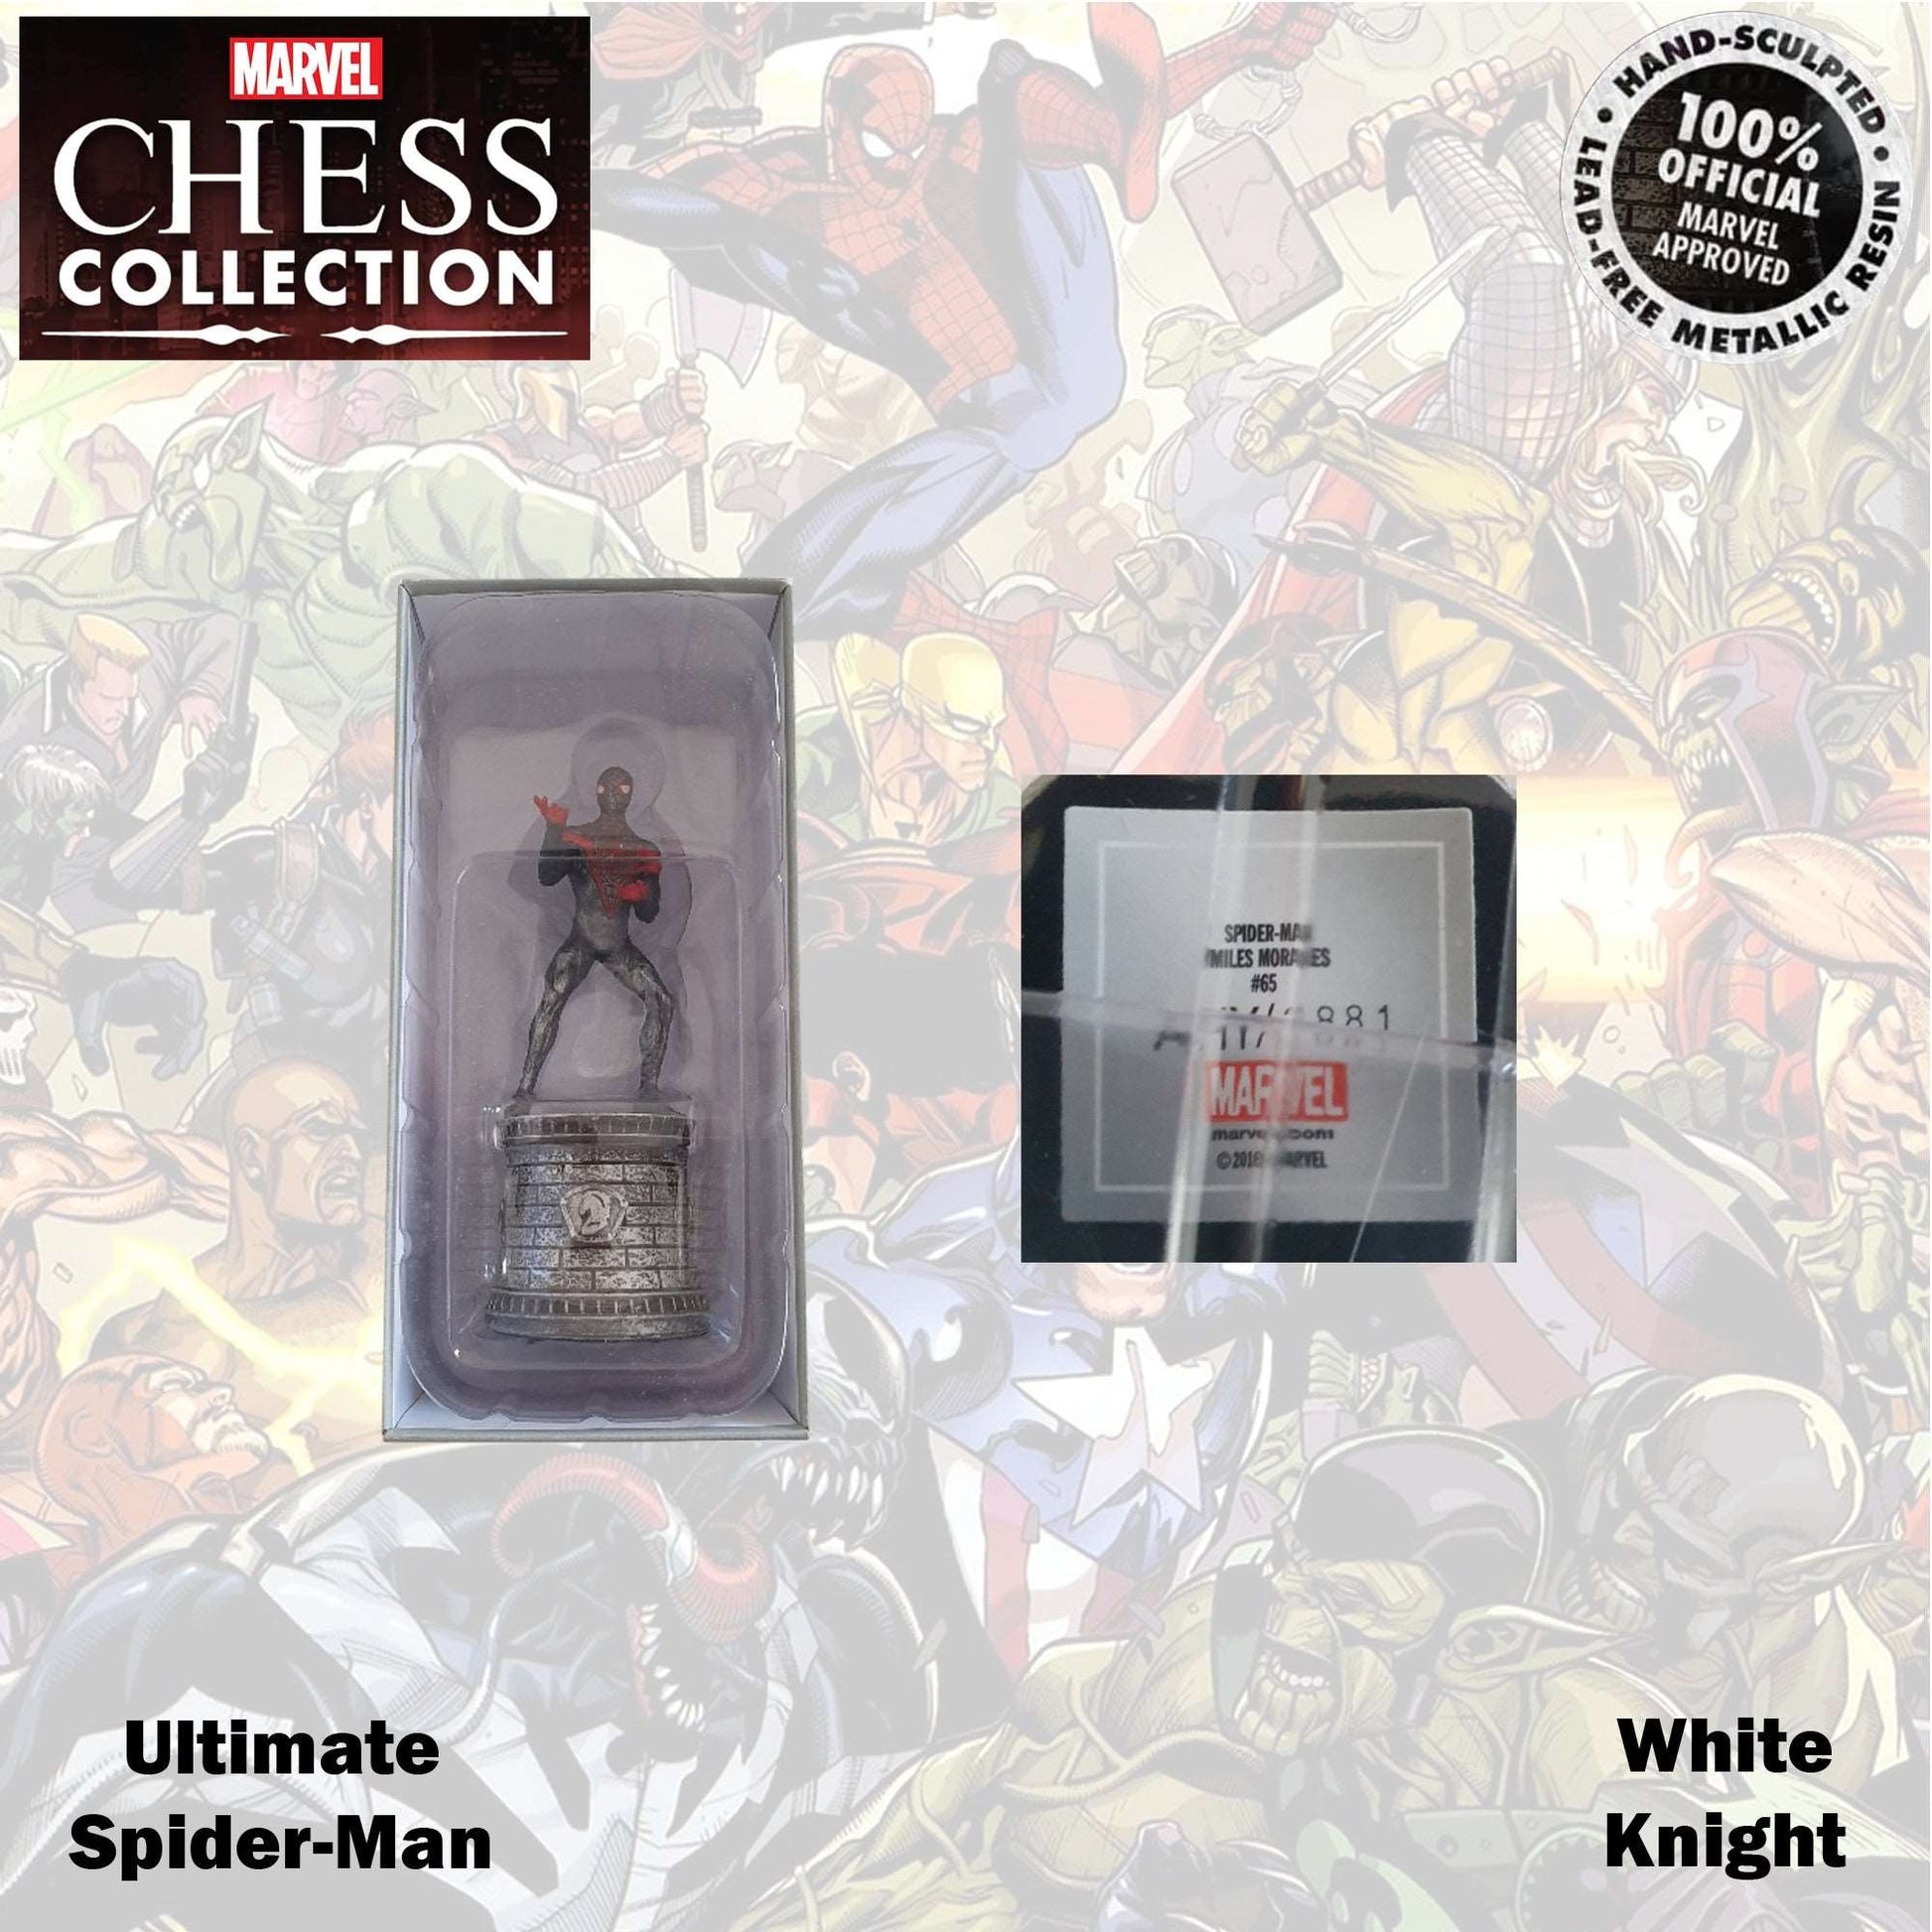 Marvel Chess Collection 11cm Ultimate Spider-Man White Knight 65